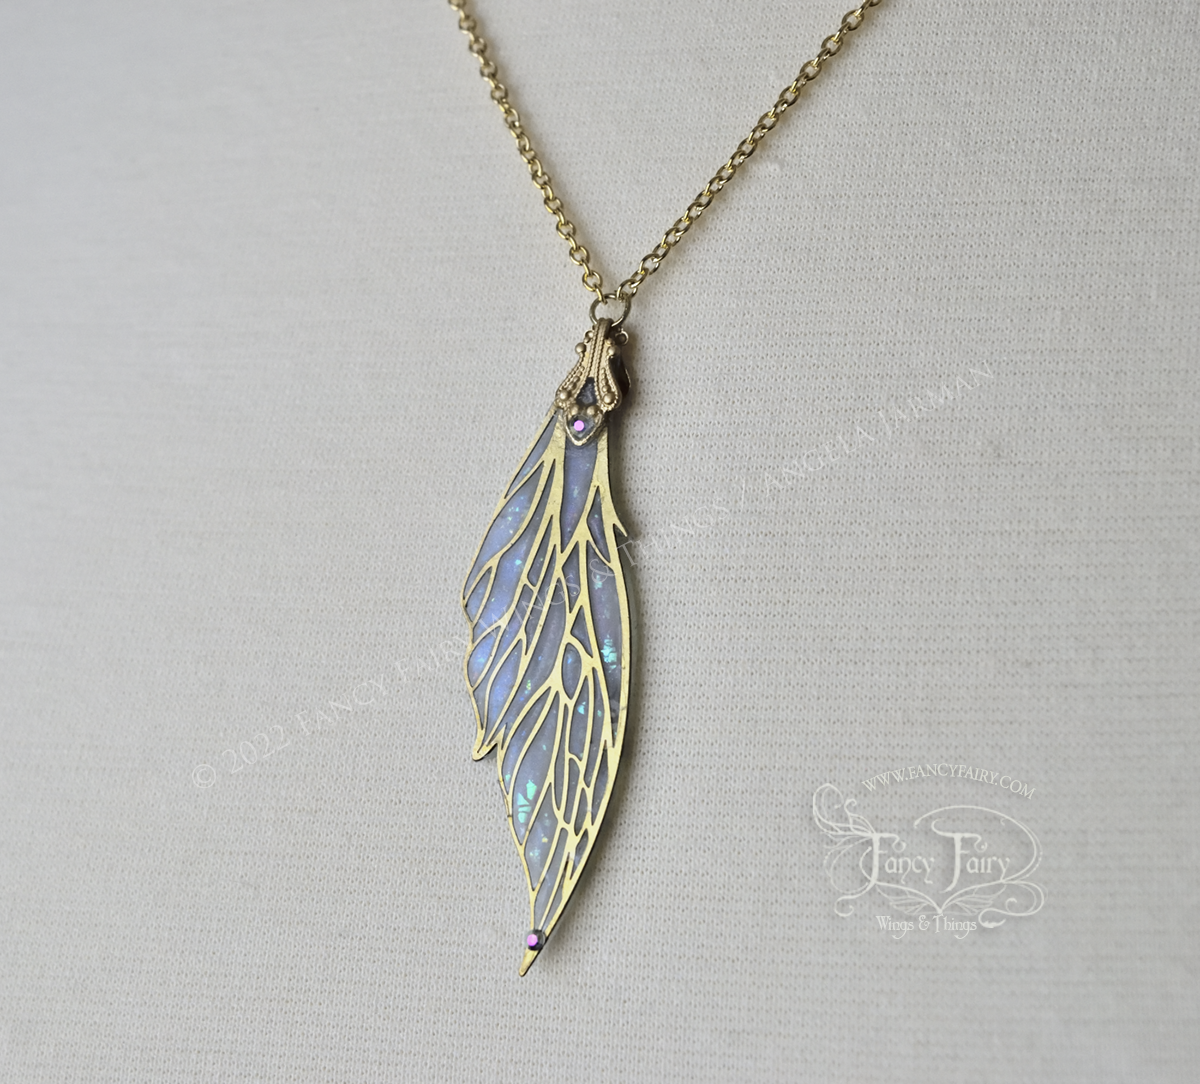 Colette Fairy Wing Necklace in Brass and Faux Opal - Irregular, Left Facing, 18 Inch Chain